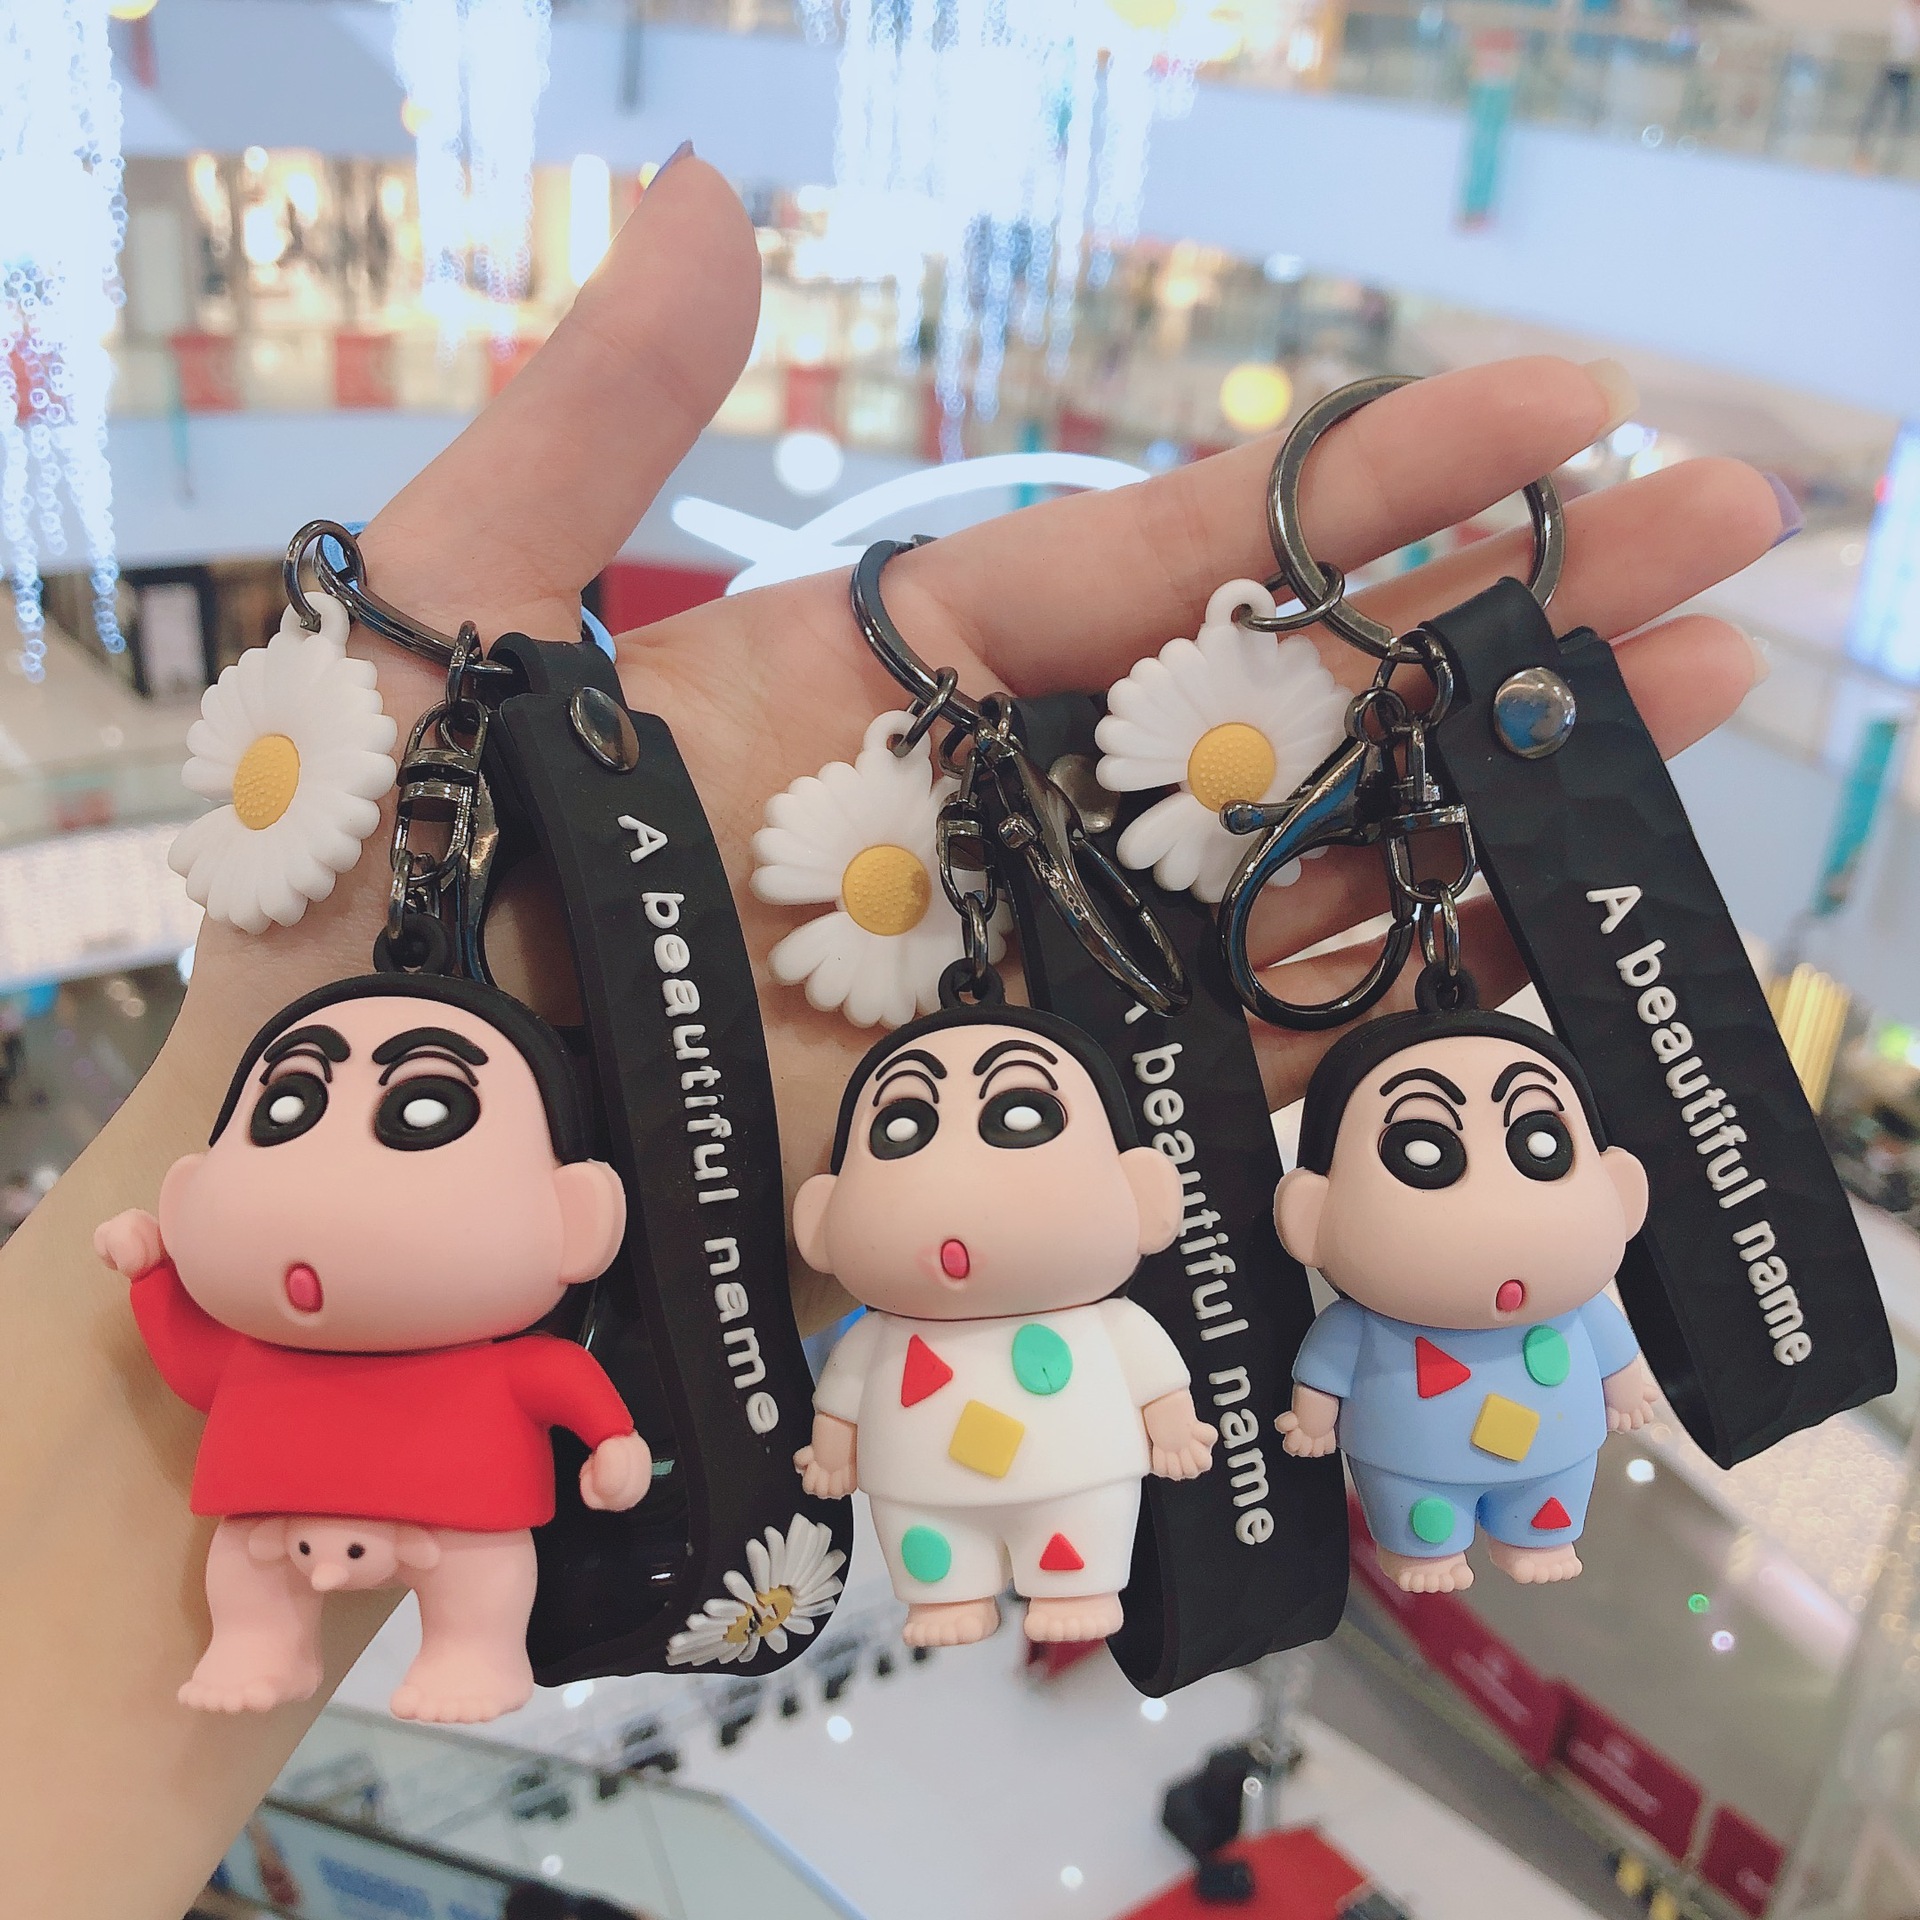 New creative small daisy crayon short new keychain men and women car key pendant personal bag keychain gift